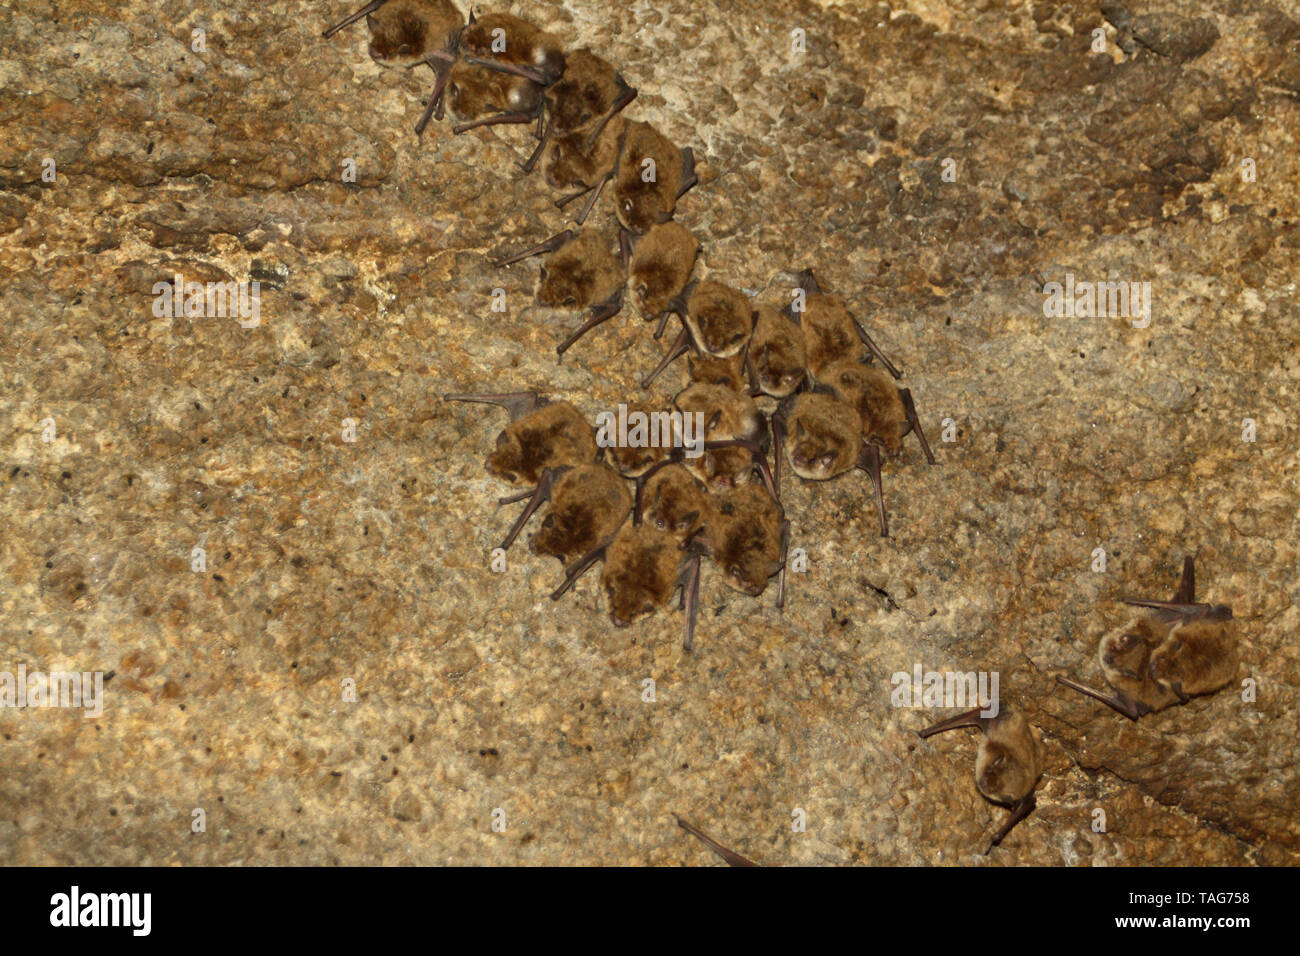 A California Myotis Bat Colony (Myotis californicus) on the roof of a cave in Southern California. Stock Photo